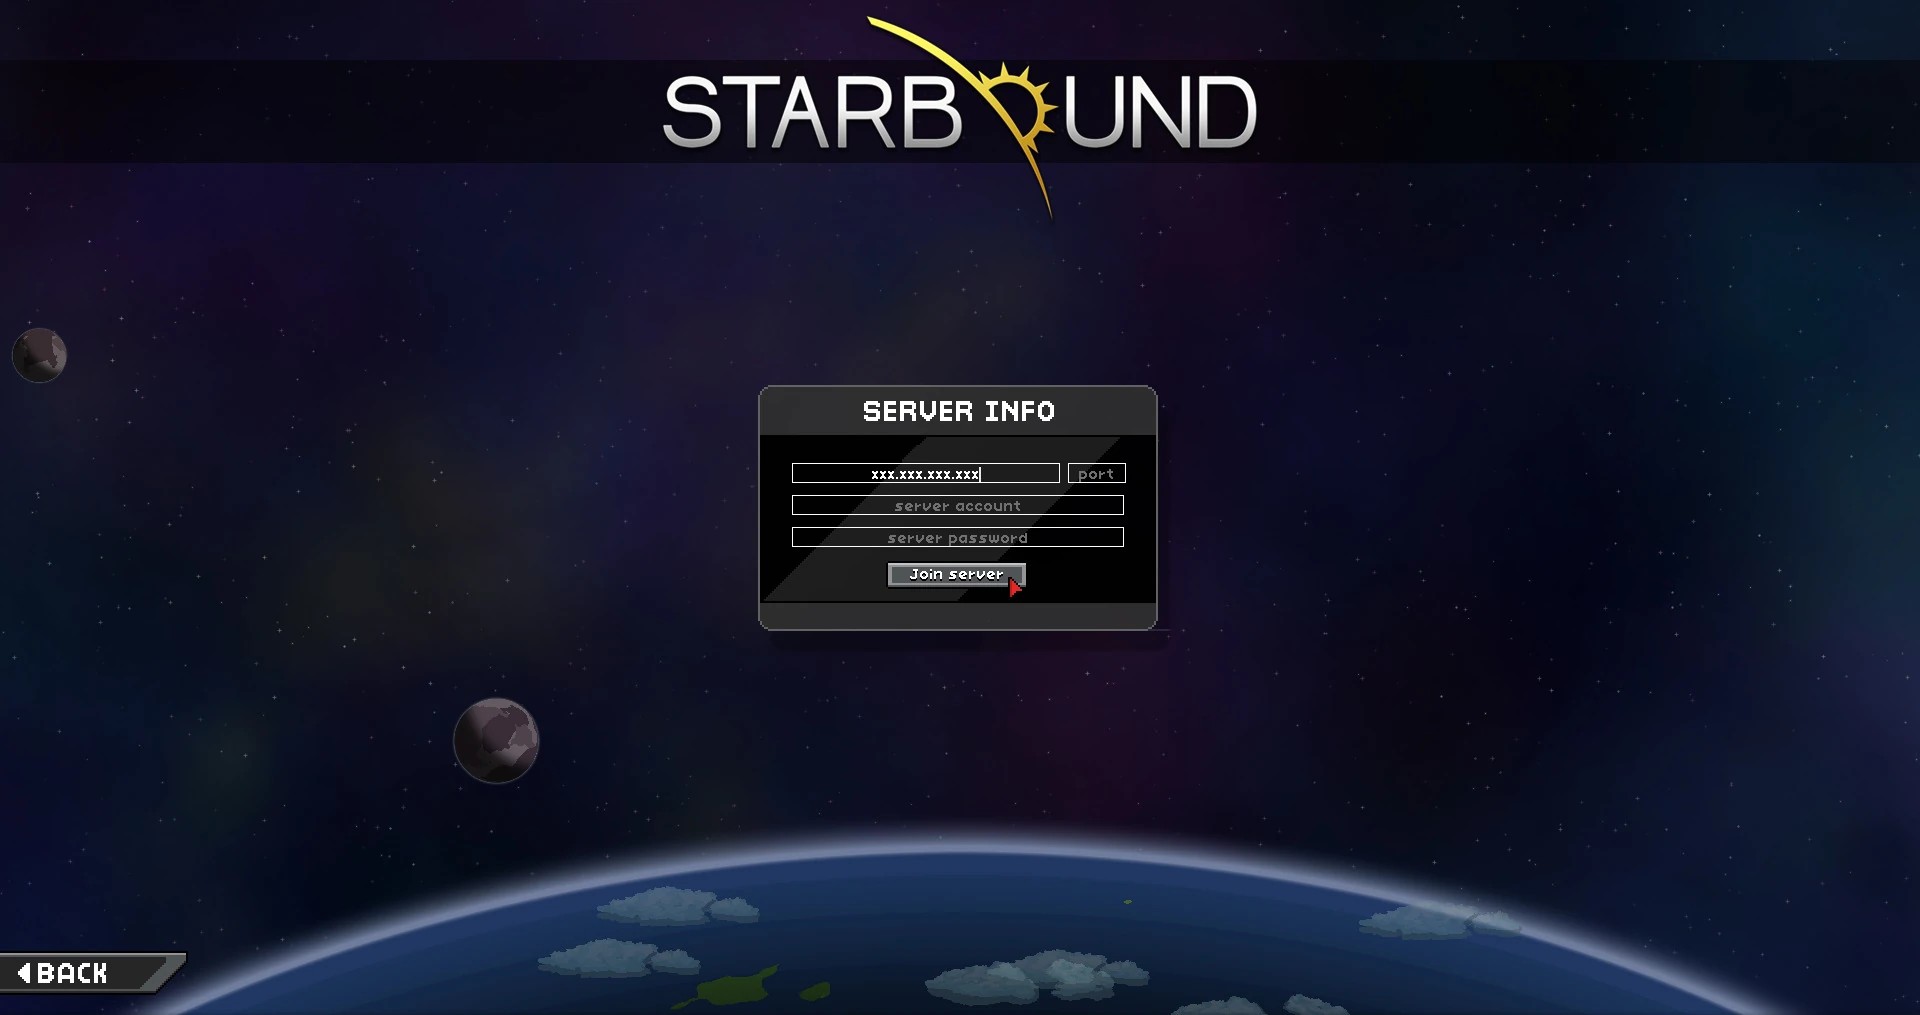 The Starbound server join dialog